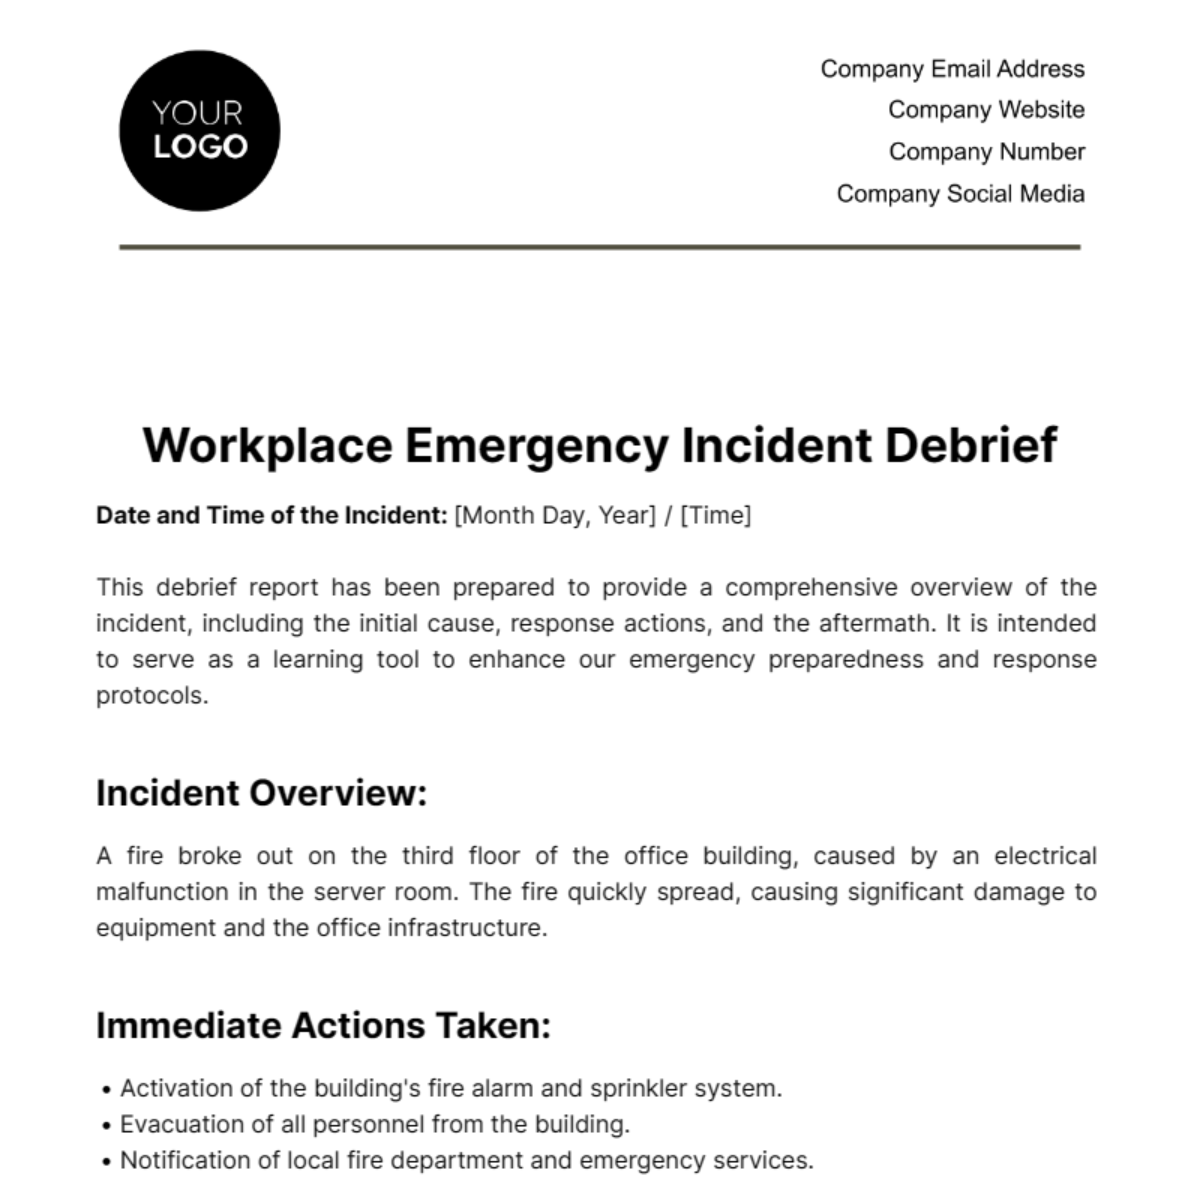 Workplace Emergency Incident Debrief Template